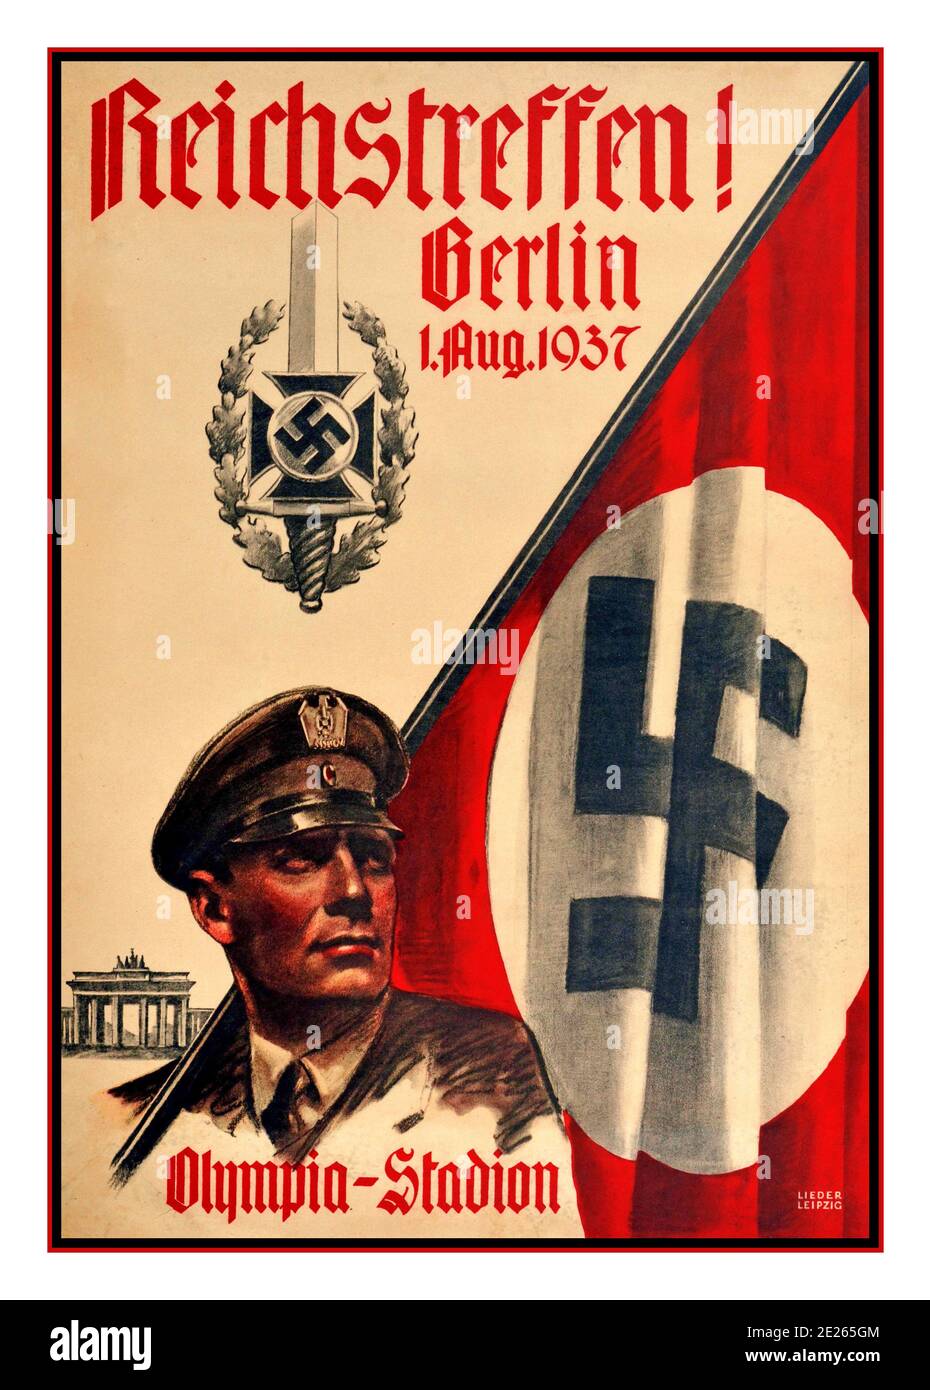 1937 Germany REICH MEETING BERLIN vintage Nazi NSDAP propaganda poster. ‘ Reichstreffen! ‘  ‘Berlin 1. Aug. 1937 - Olympia Stadion’ Reich Meeting! Berlin. 1. Aug. 1937 - Olympic Stadium. artwork features swastika emblem, with a swastika flag, a Nazi NSDAP member looks towards the sky, illustration of Brandenburg Gate in the background. Printed in Leipzig. Issued by Nationalsozialistische Deutsche Arbeiter-Partei - NSDAP.. Country of issue: Austria, 1937 Stock Photo